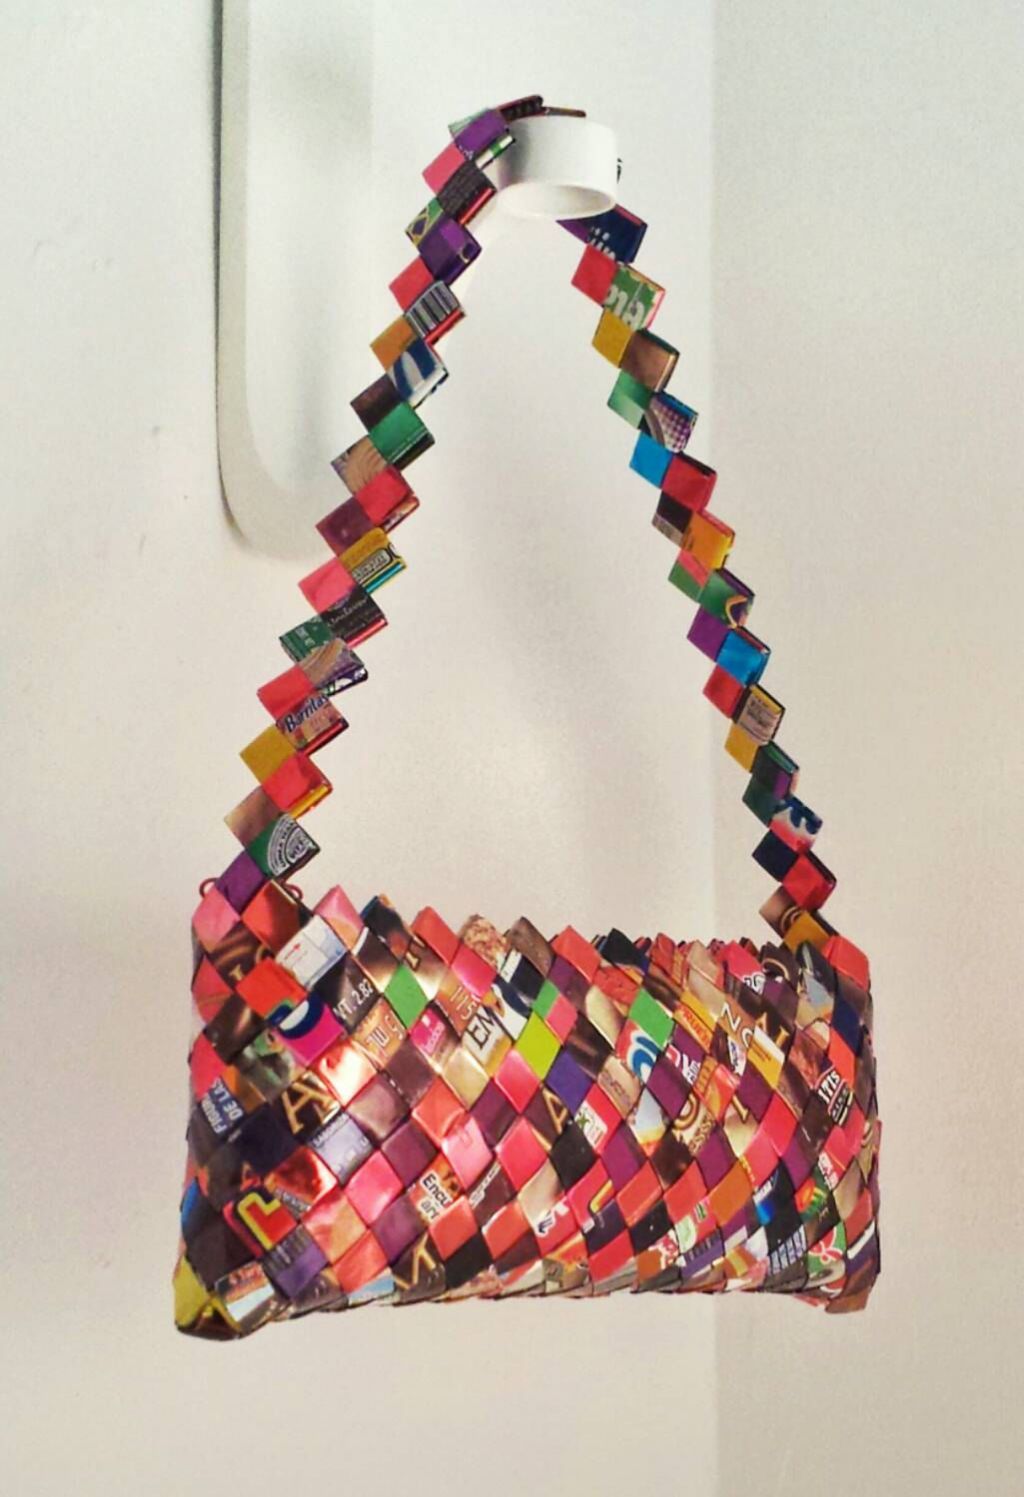 CANDY WRAPPER - Woven Shoulder Bag / Purse - Multicolor RECYCLED Paper  Handmade | eBay